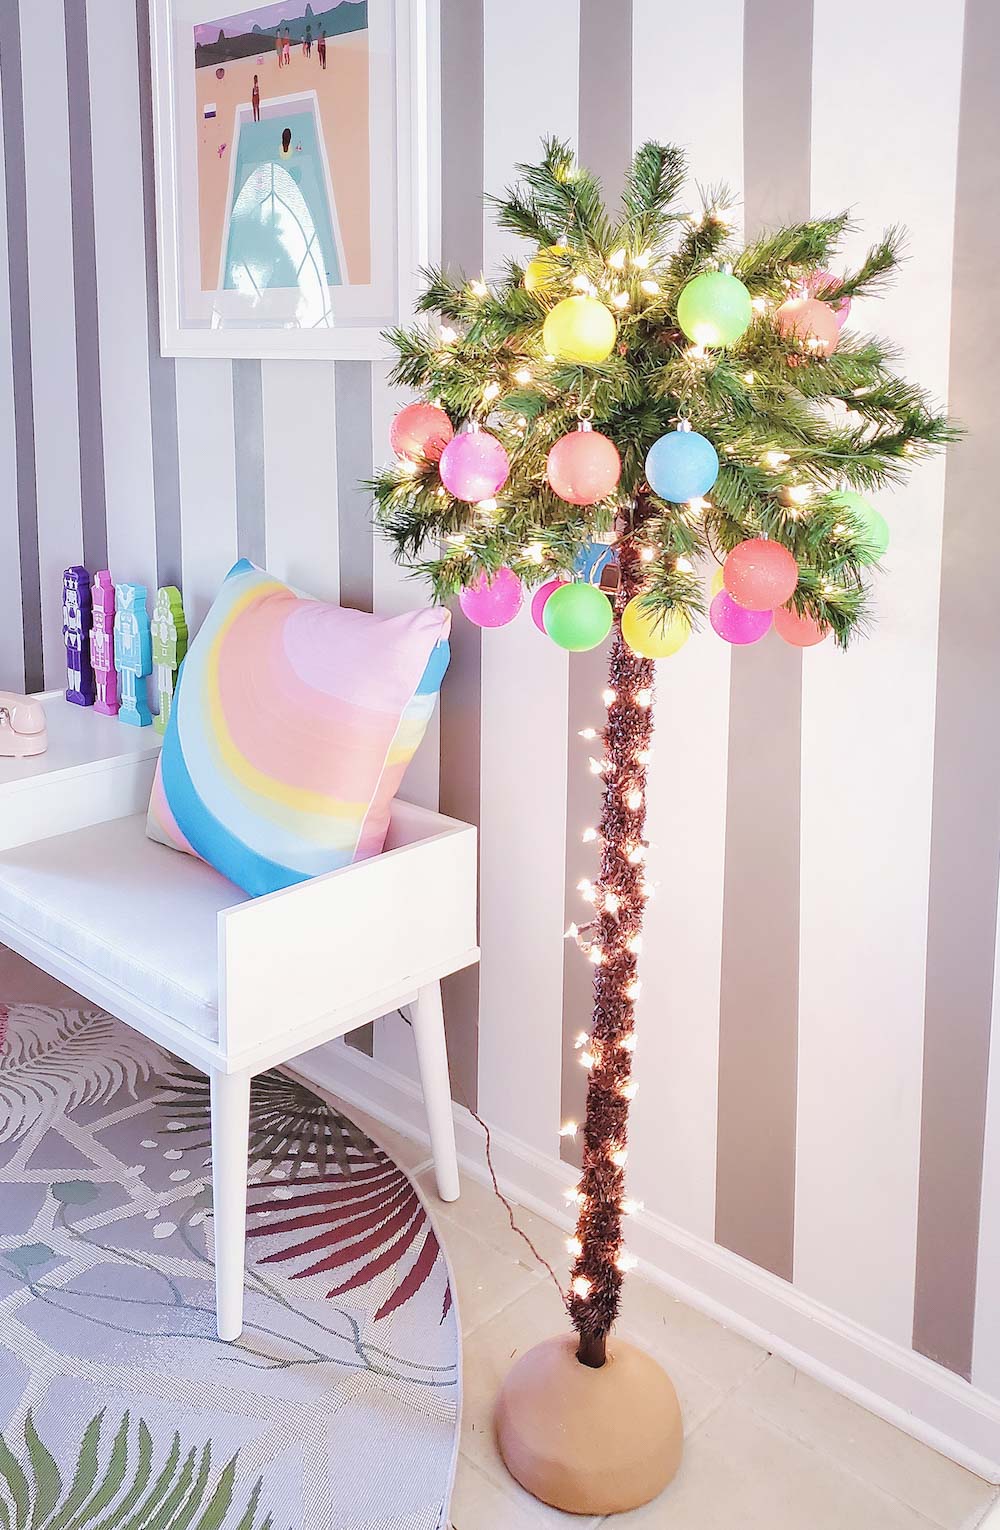 Small indoor palm tree with lights, ornaments and a stripe wall background